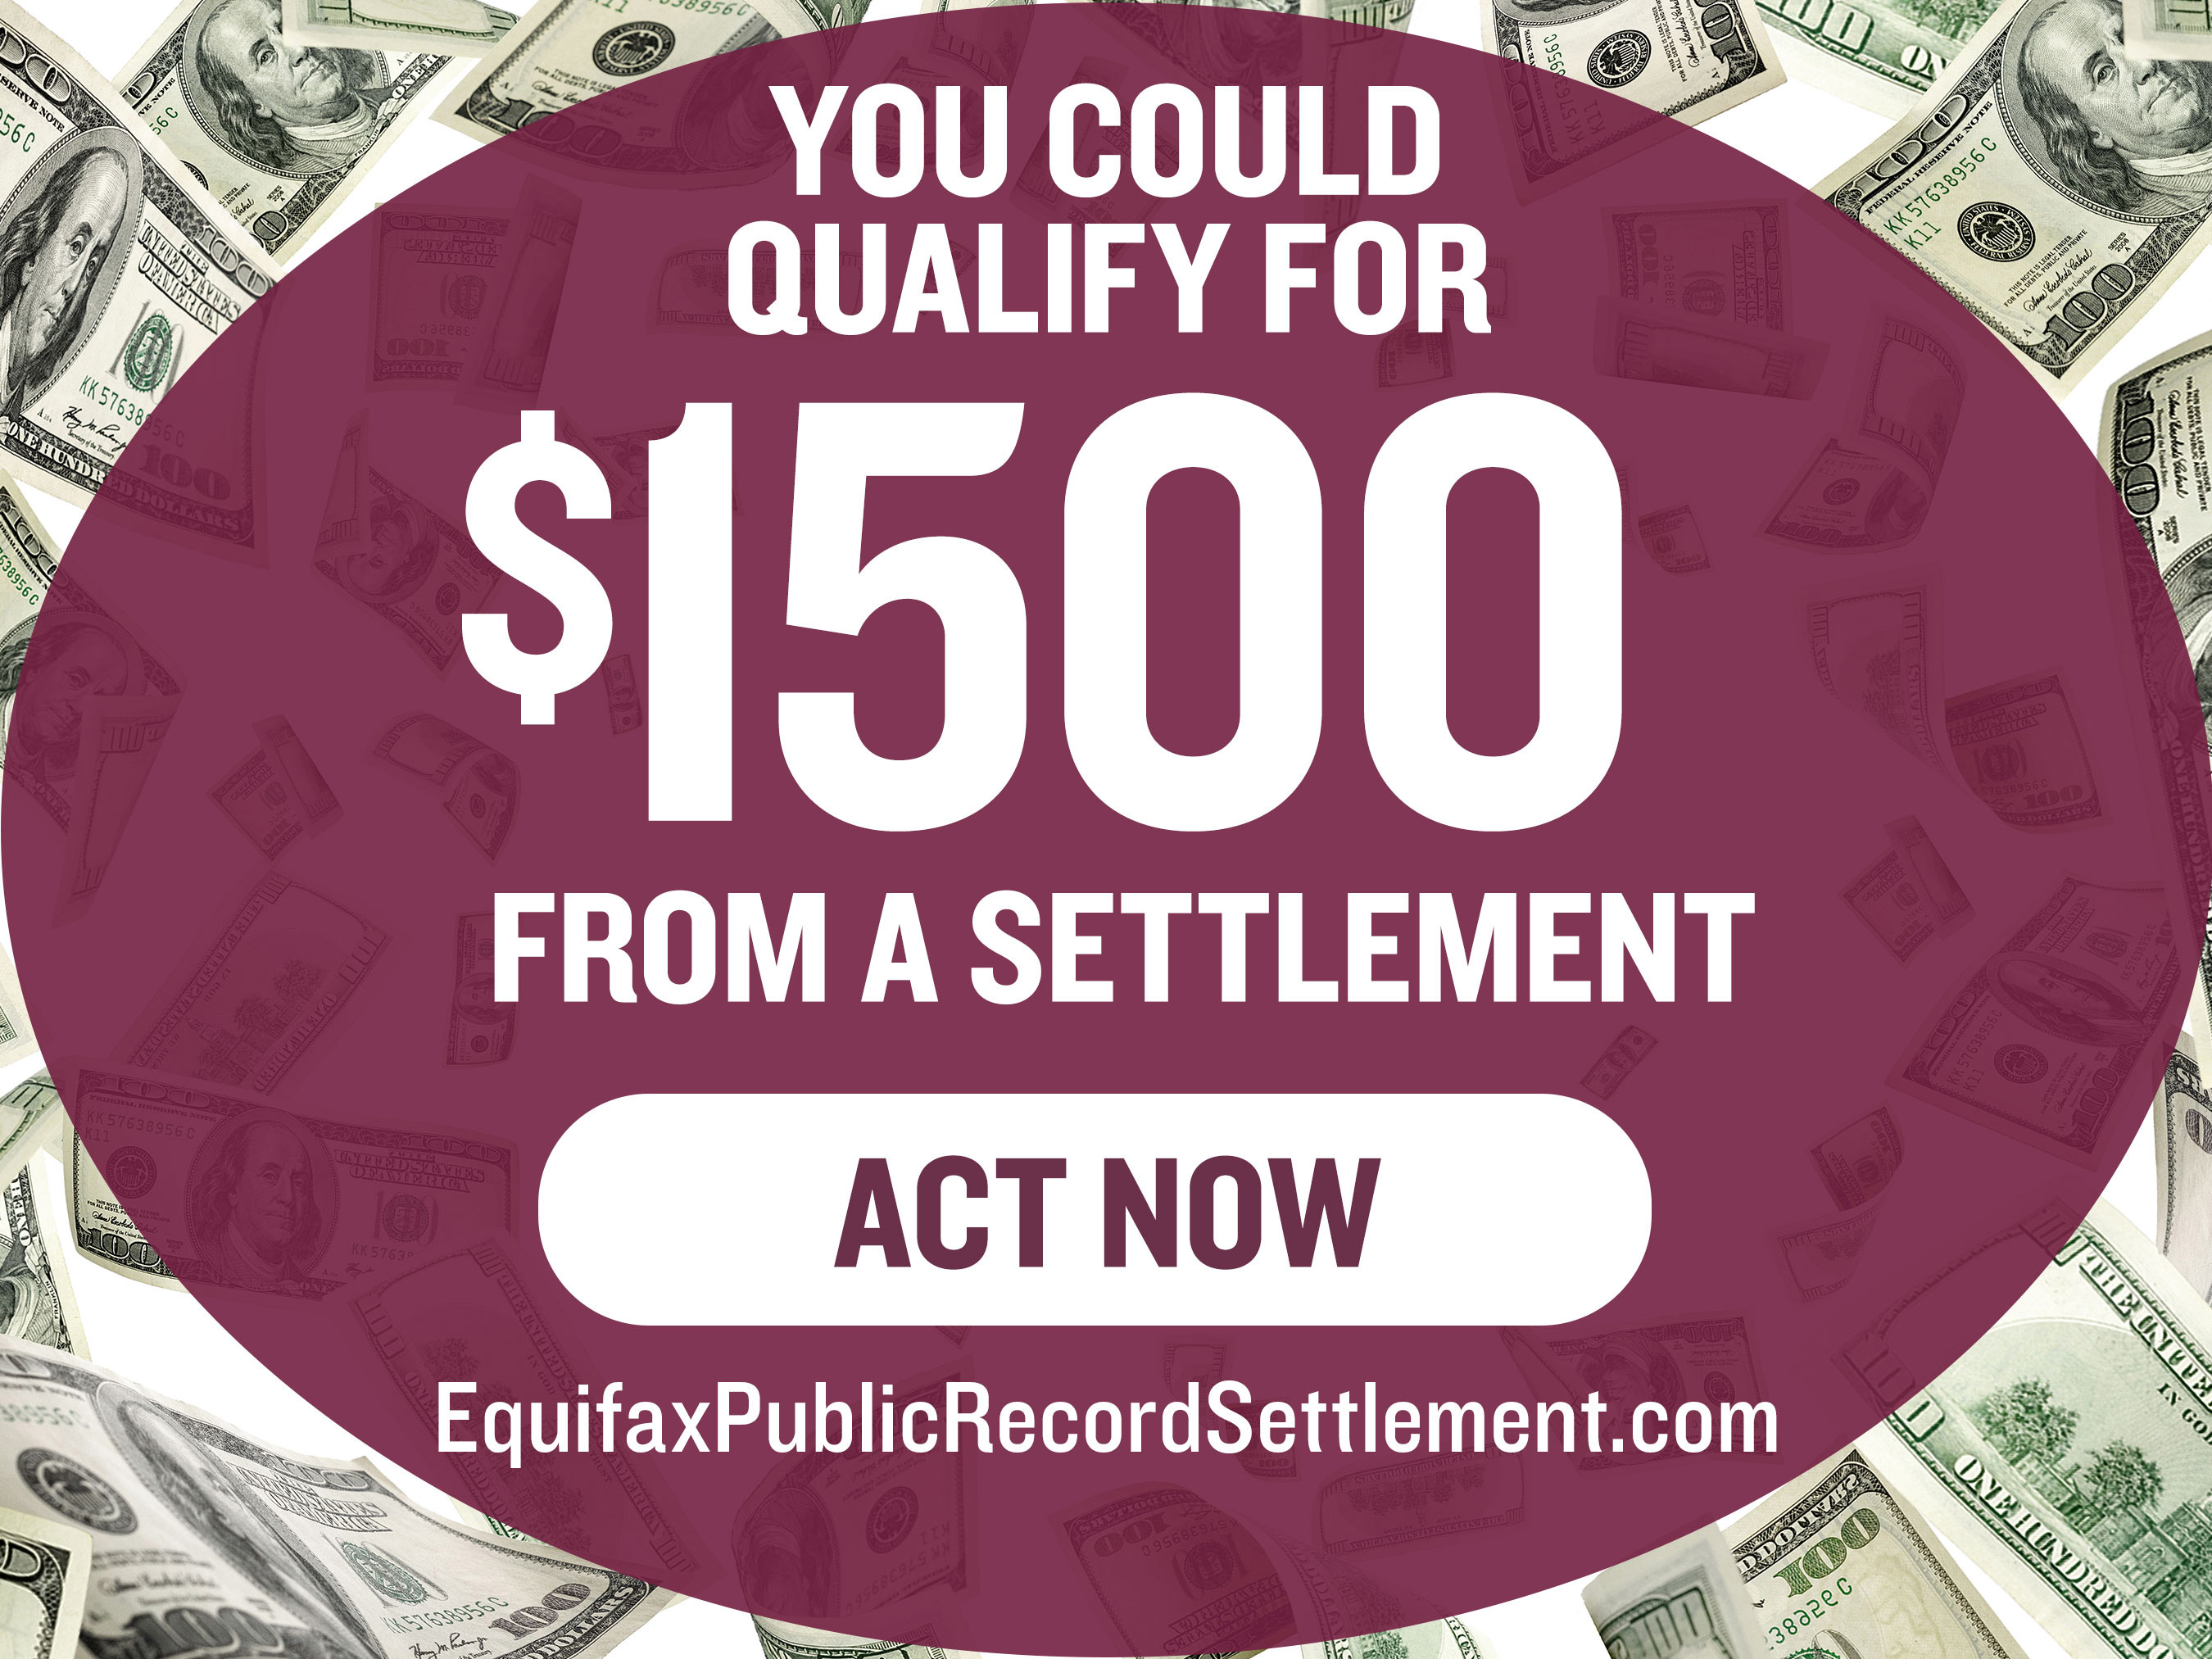 Equifax created an Alternative Dispute Resolution Program for consumers who were harmed by an Equifax credit report containing an inaccurate civil judgment or tax lien.